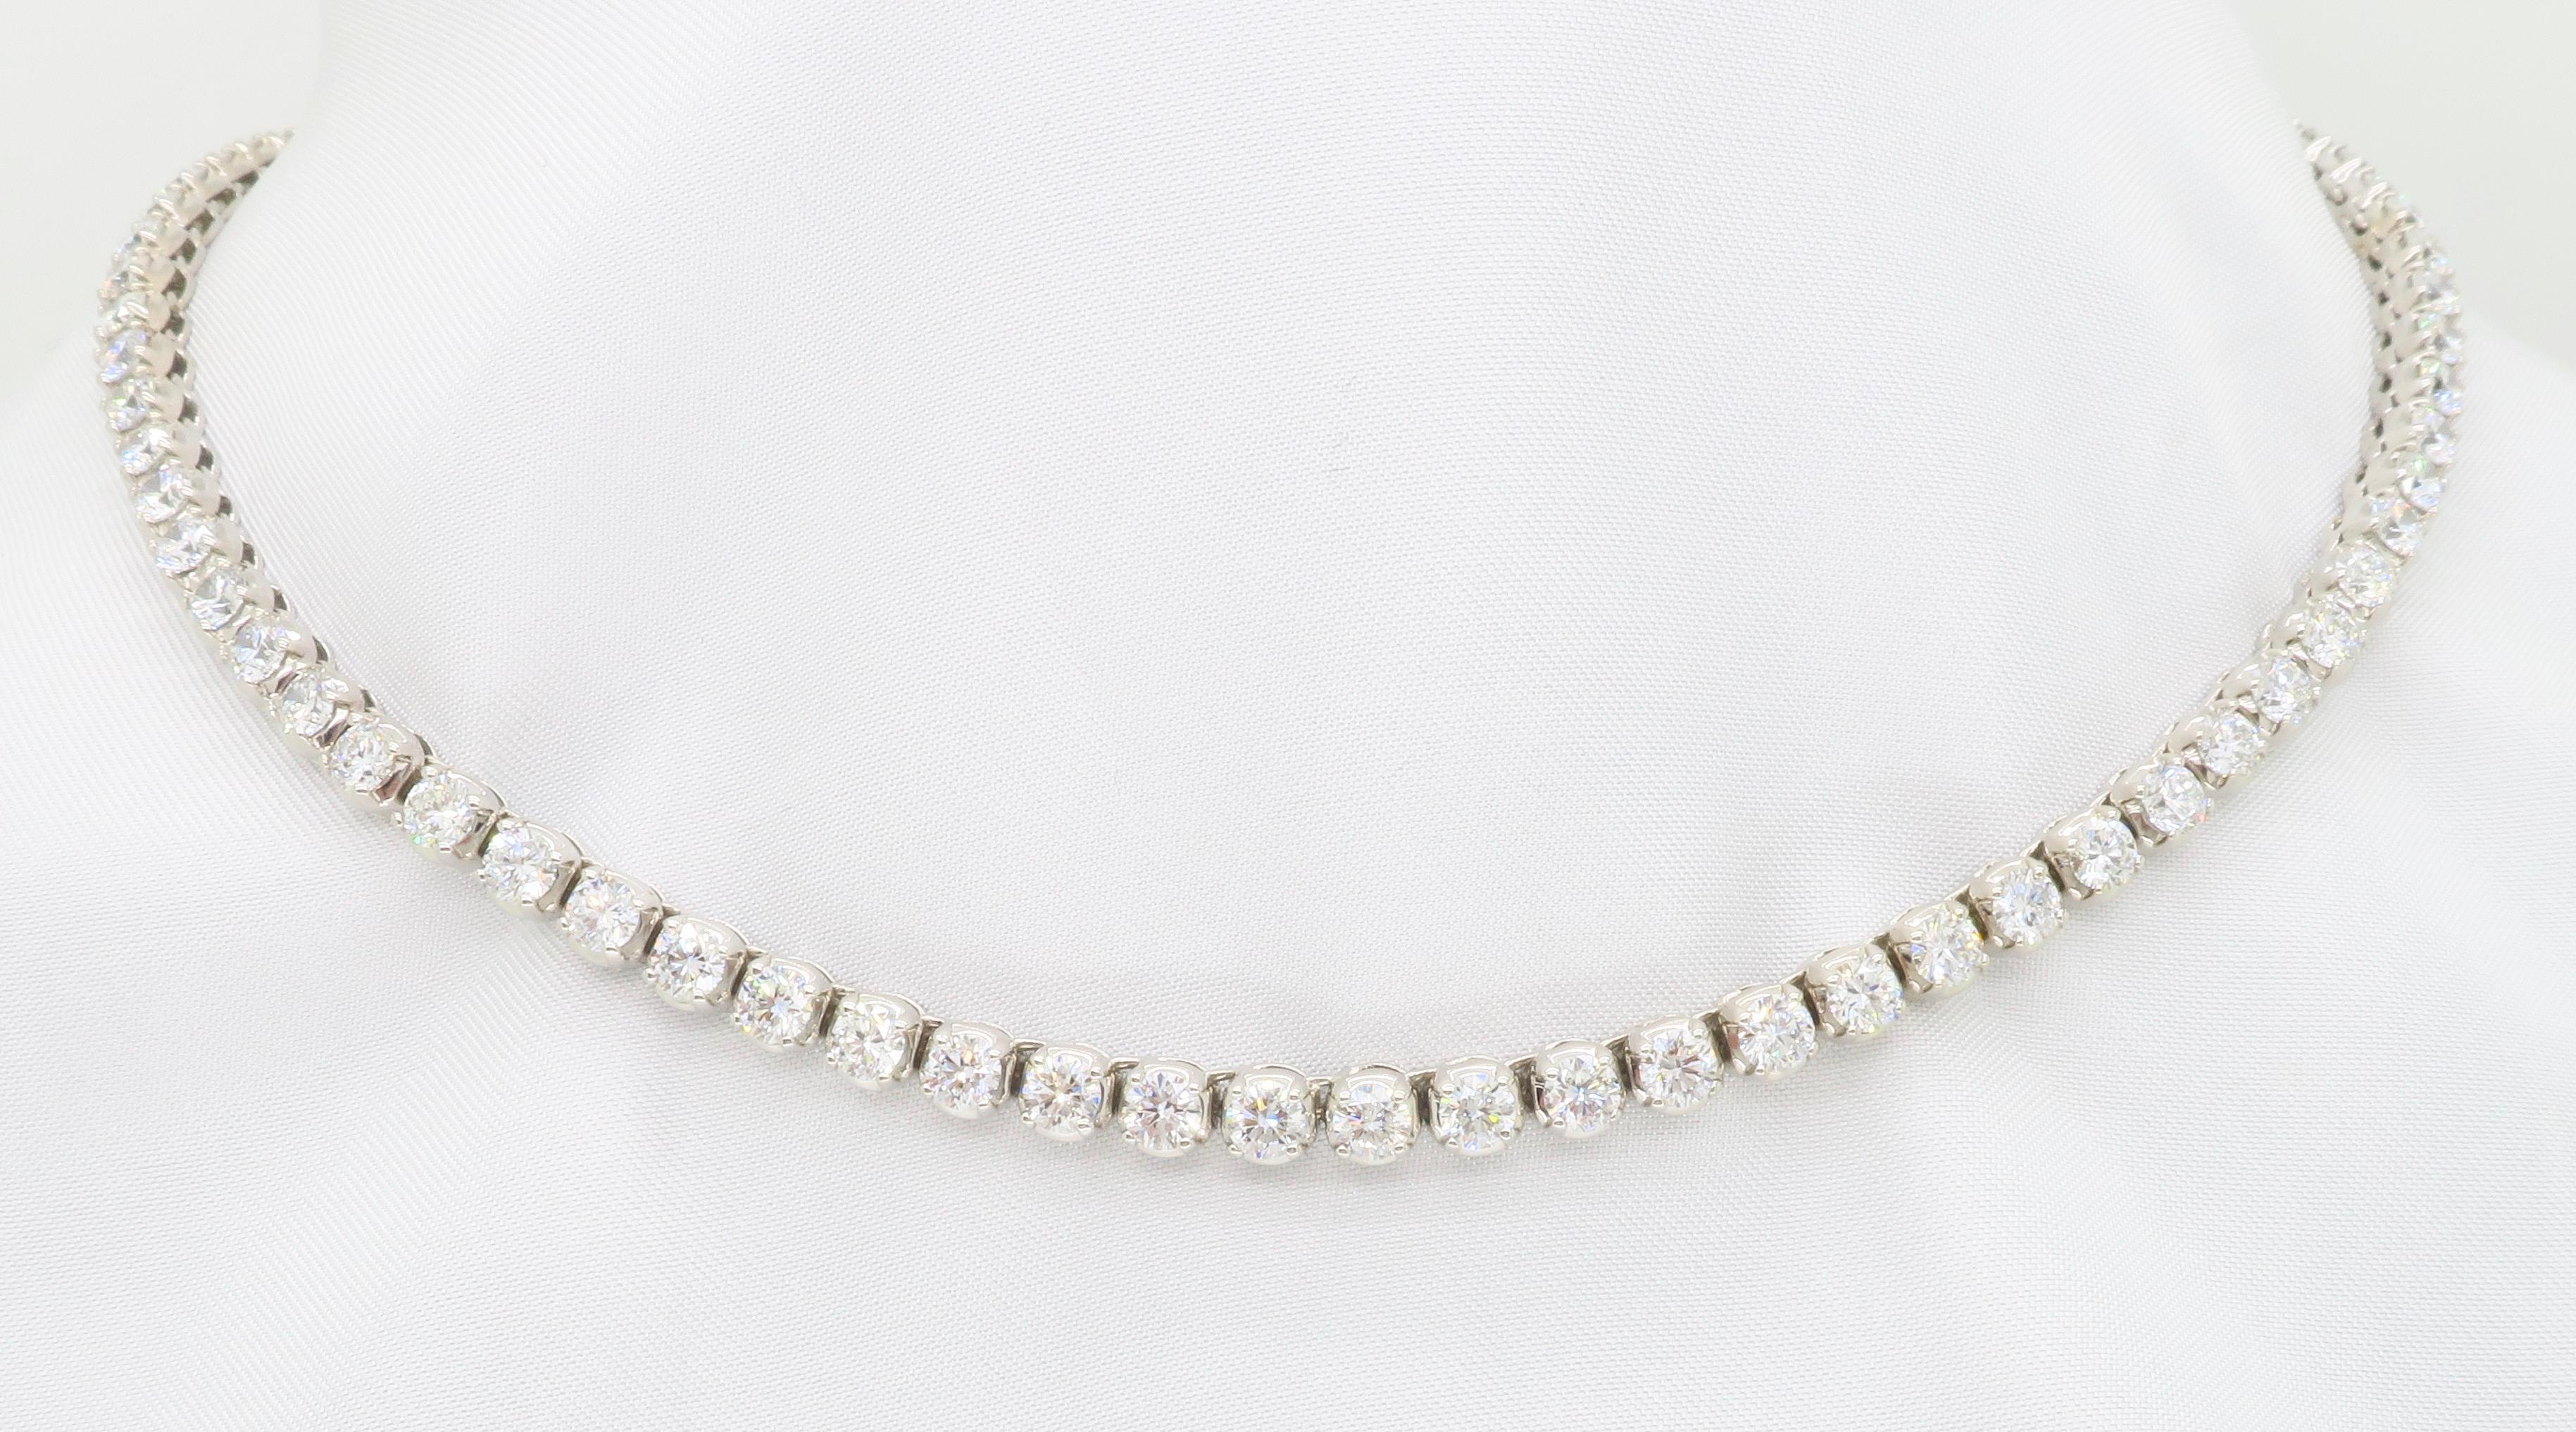 Absolutely stunning 14k white gold tennis necklace featuring approximately 15.00CTW of Round Brilliant Cut Diamonds.

Total Diamond Carat Weight:  Approximately 15.00CTW
Diamond Cut: LG Round Brilliant Cut  
Color: Average F
Clarity: Average